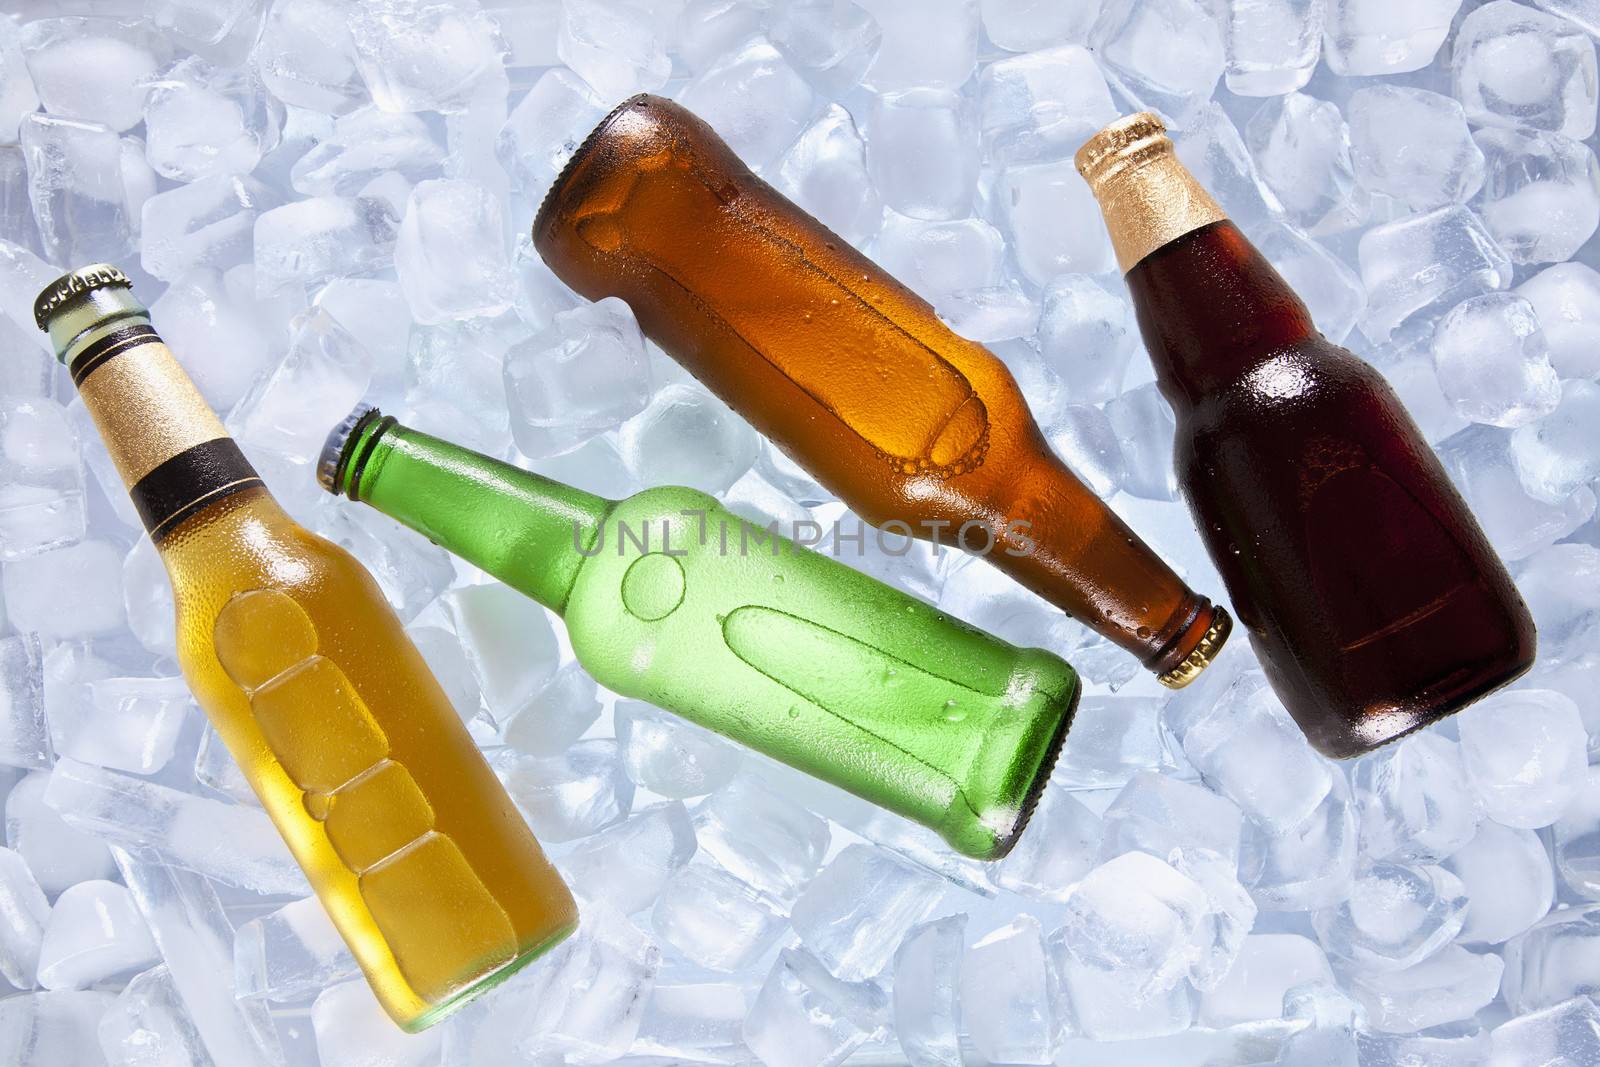 Four different bottles of beer cooling on ice.